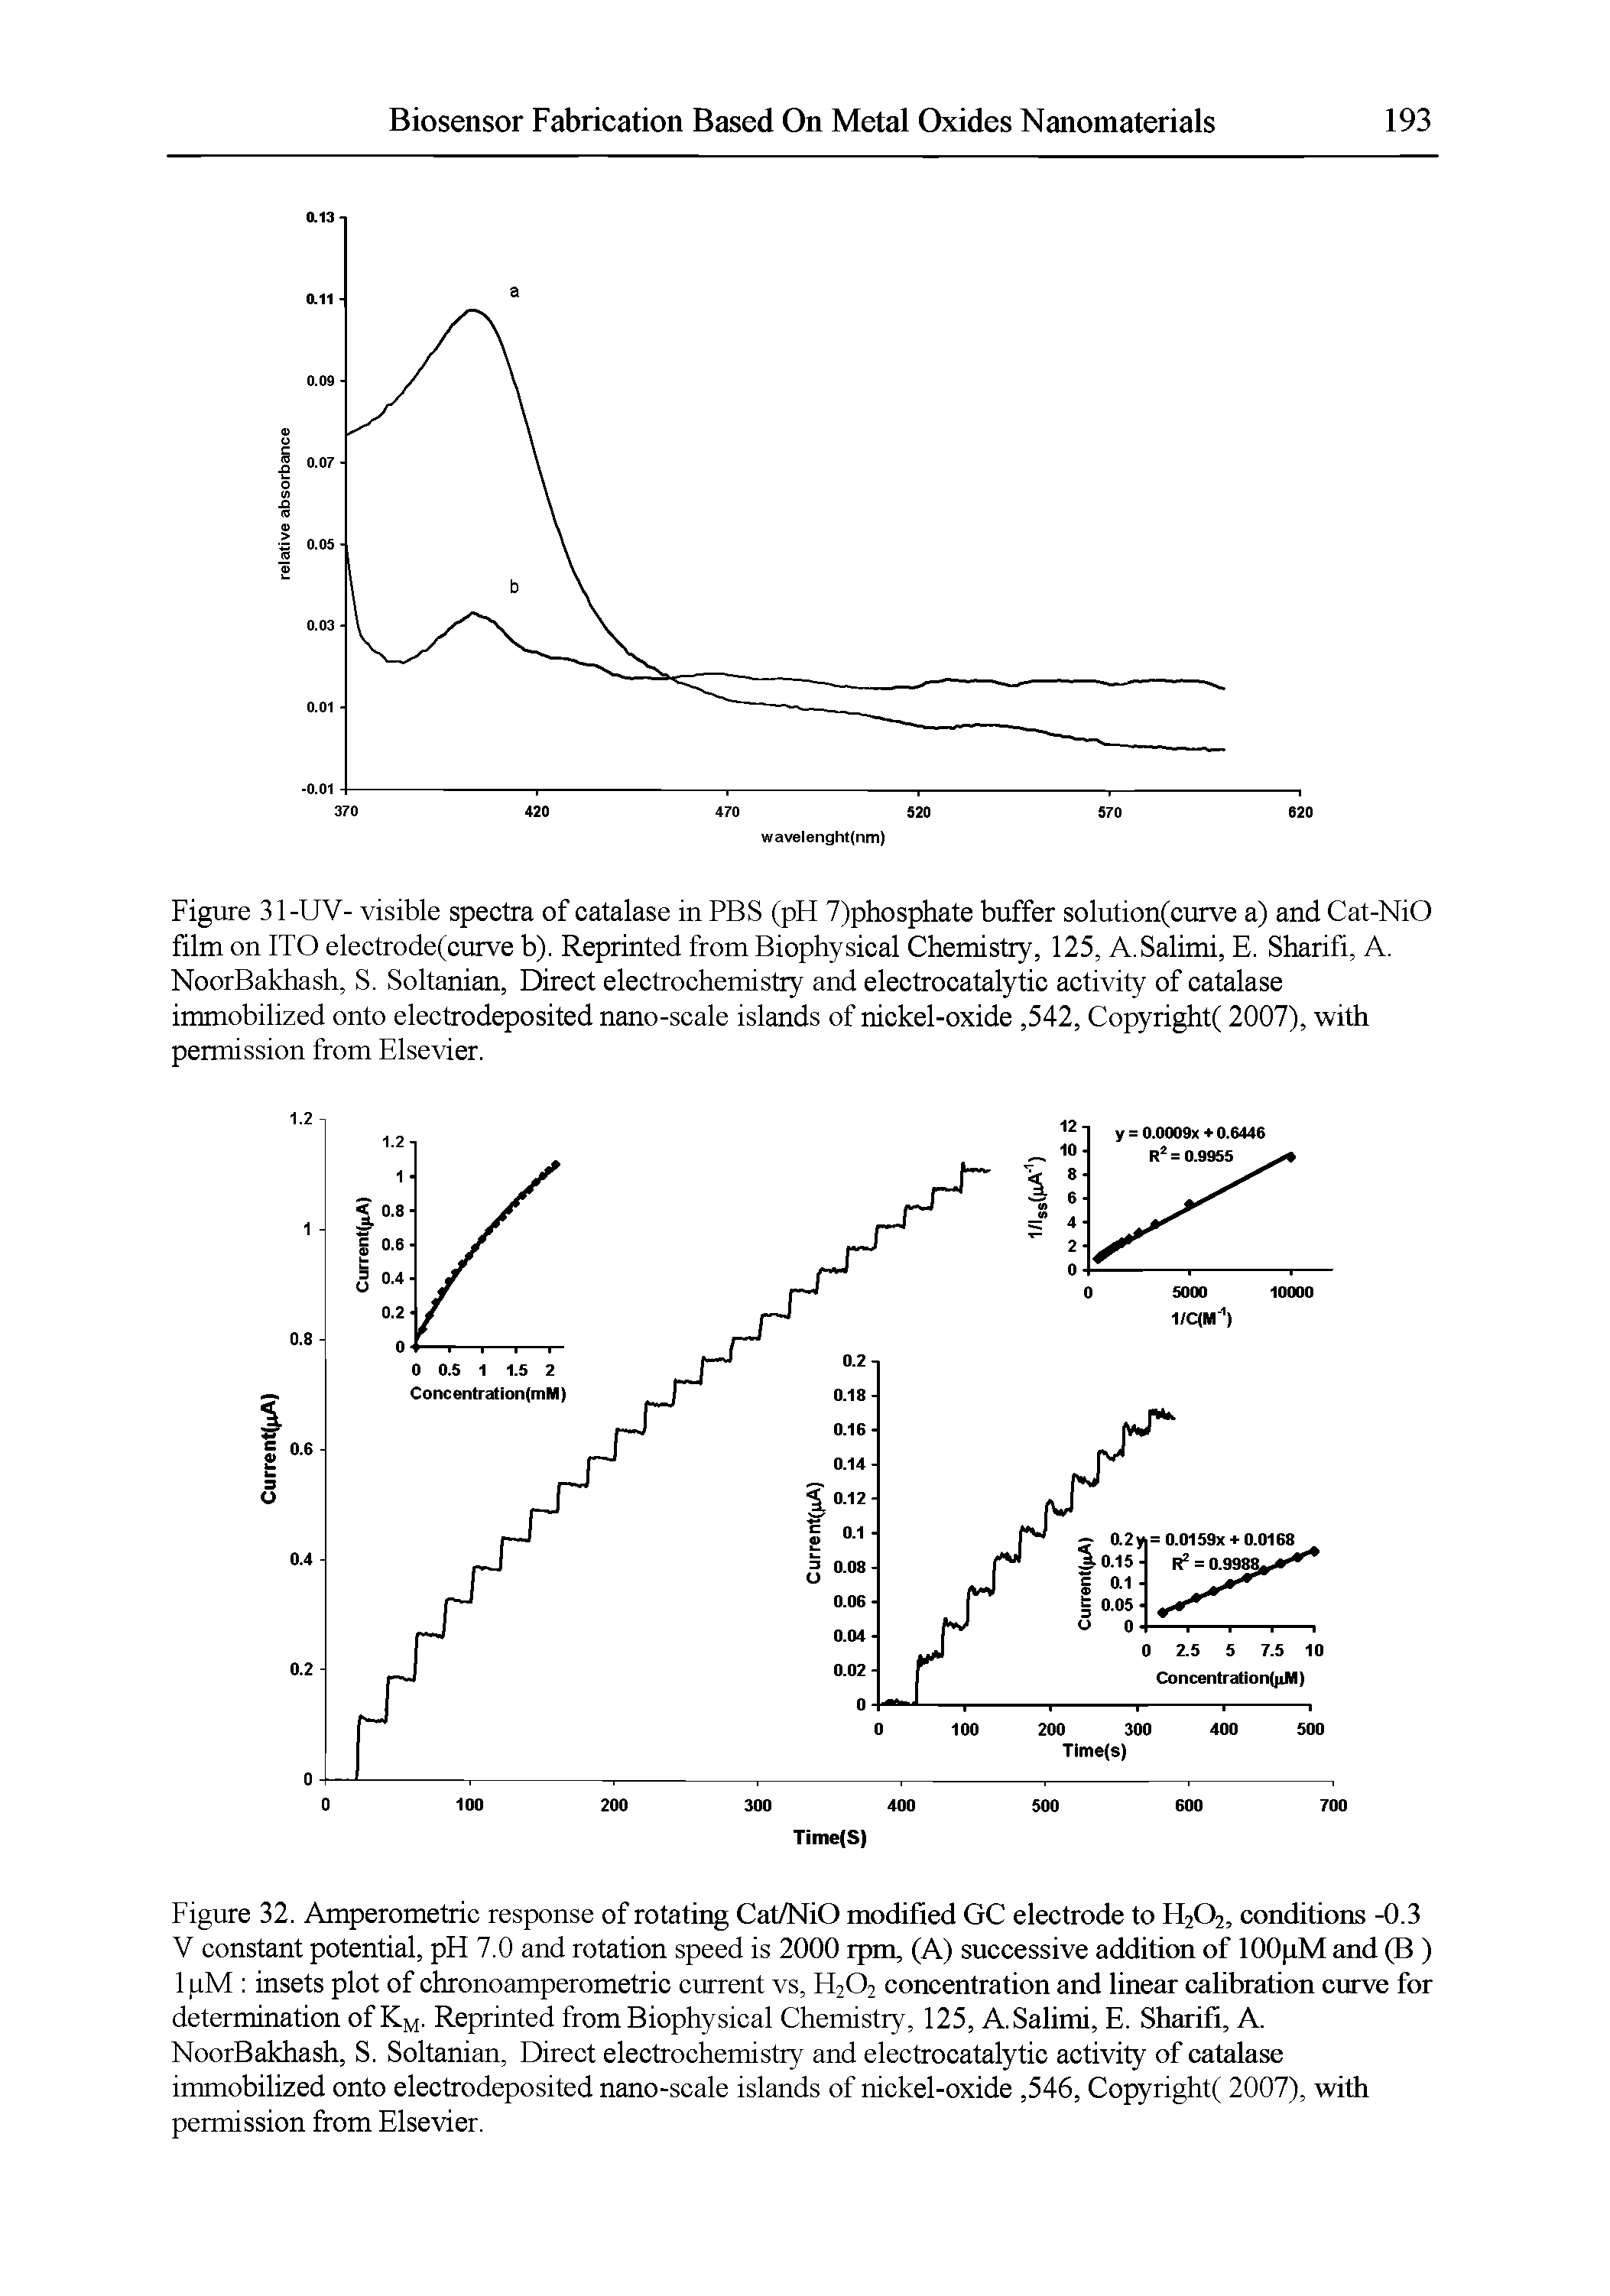 Figure 32. Amperometric response of rotating Cat/NiO modified GC electrode to H202, conditions -0.3 V constant potential, pH 7.0 and rotation speed is 2000 rpm, (A) successive addition of lOOpM and (B ) 1 liM insets plot of chronoamperometric current vs, H202 concentration and linear calibration curve for determination of KM. Reprinted from Biophysical Chemistry, 125, A.Salimi, E. Sharifi, A. NoorBakhash, S. Soltanian, Direct electrochemistry and electrocatalytic activity of catalase immobilized onto electrodeposited nano-scale islands of nickel-oxide, 546, Copyright( 2007), with permission from Elsevier.